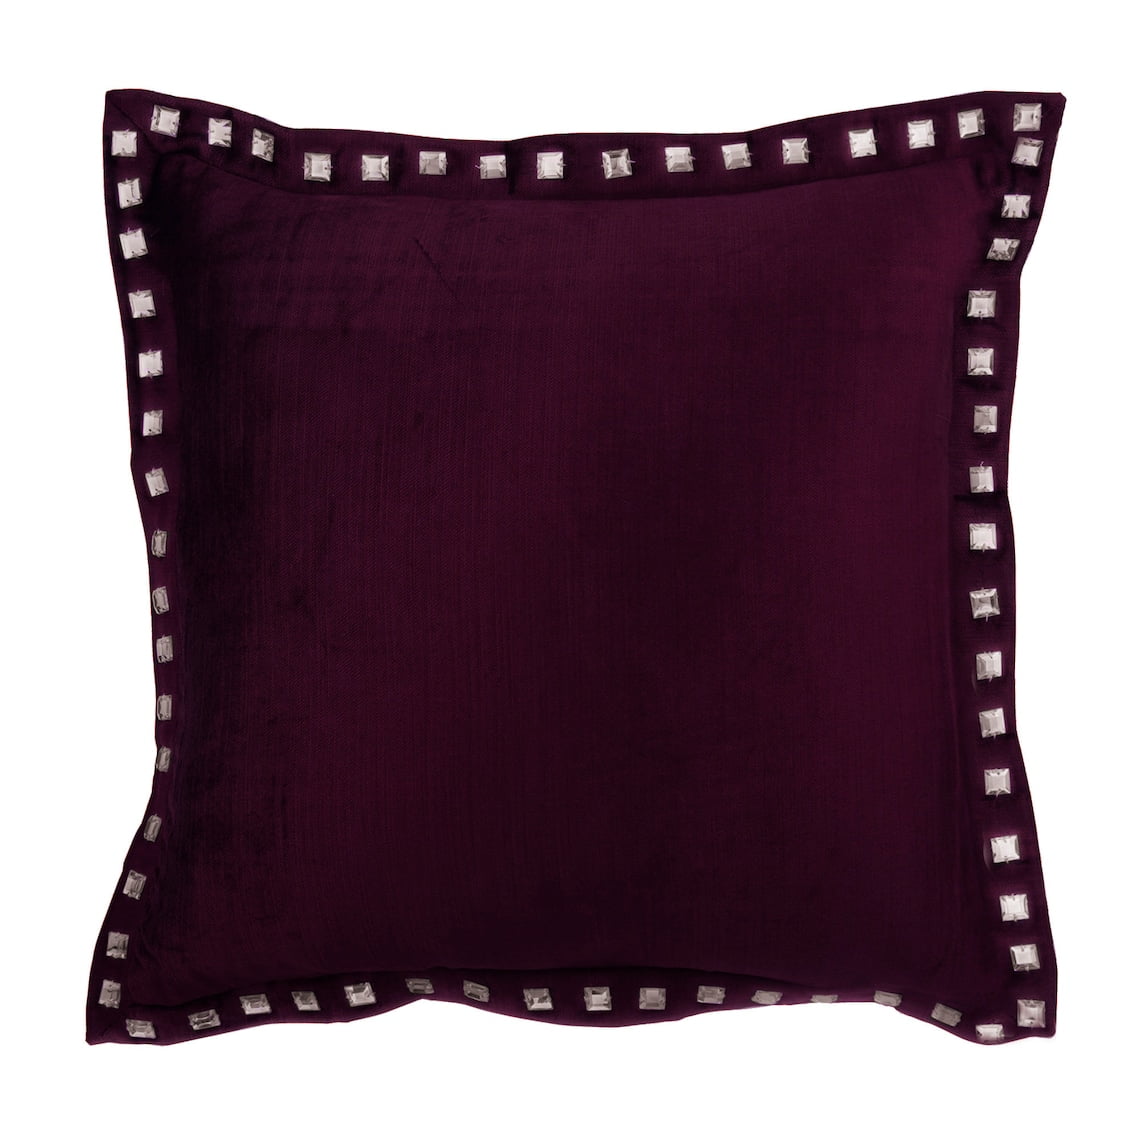 Throw Pillow Cover, Plum Pillow Cases, Solid Decorative Pillows ...